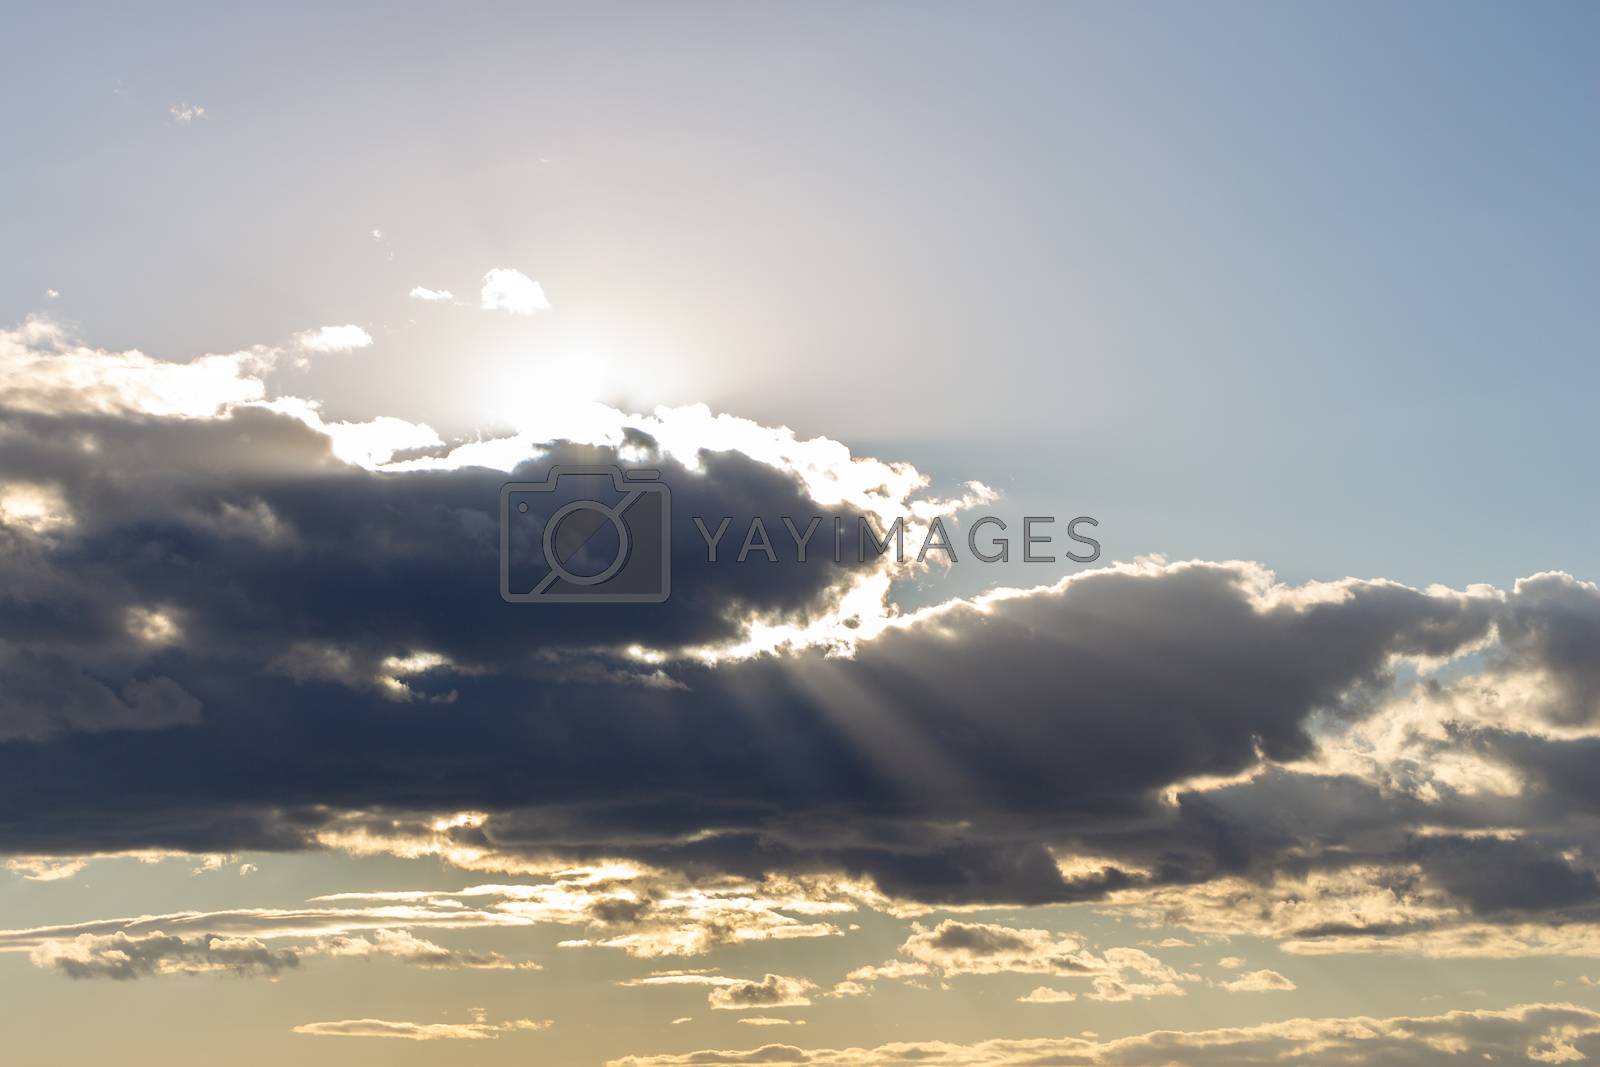 Royalty free image of Sun rays breaking through cumulus clouds. The concept of divine light, a glimmer of hope or overcoming difficulties. Spiritual religious background. by Eugene_Yemelyanov